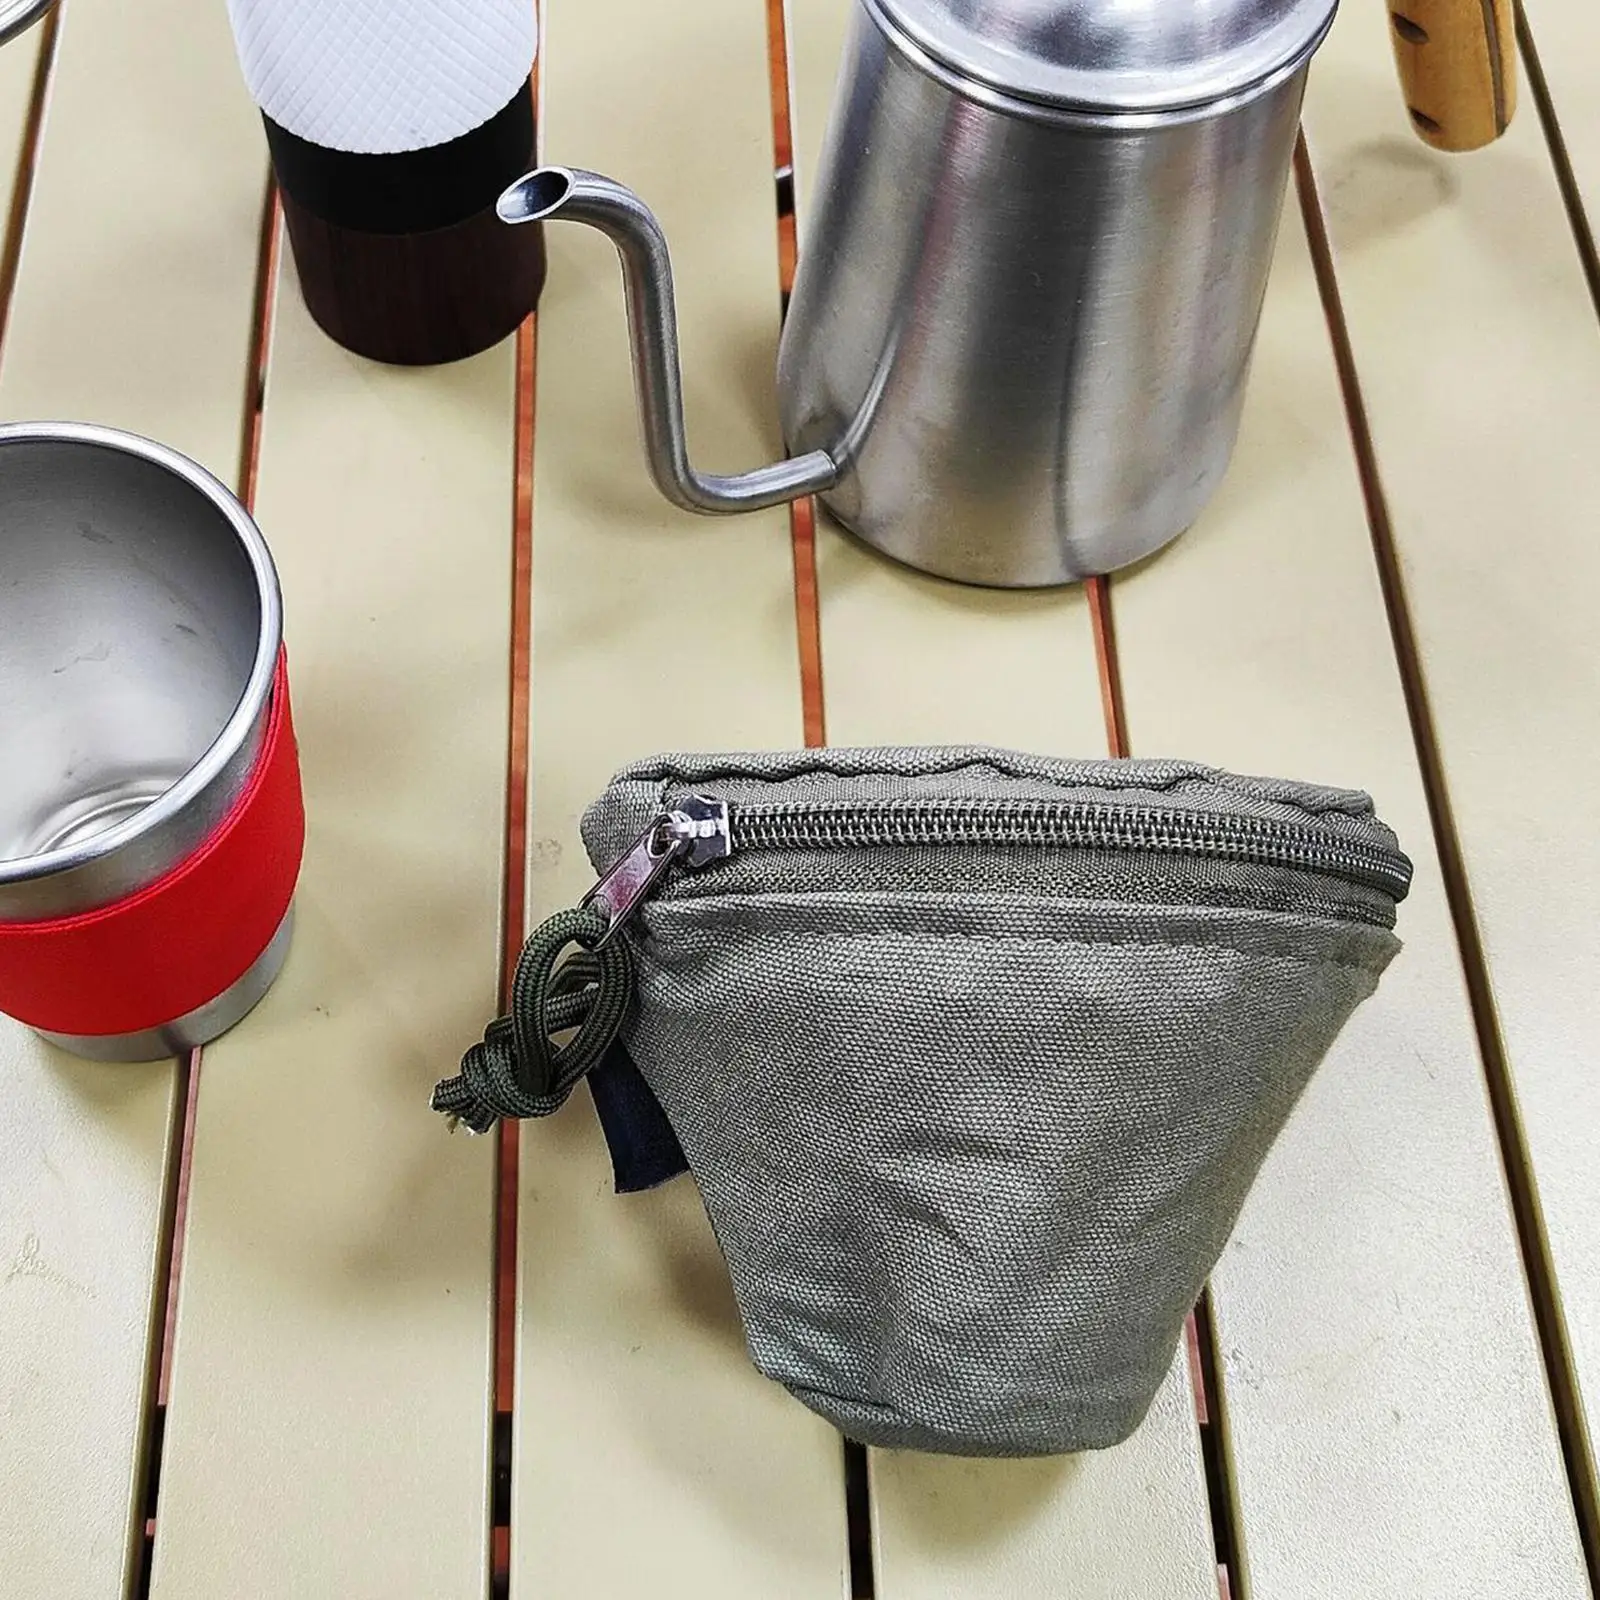 Coffee Filter Dispenser Pouch Basket Coffee Filter Holder for Hiking Indoor